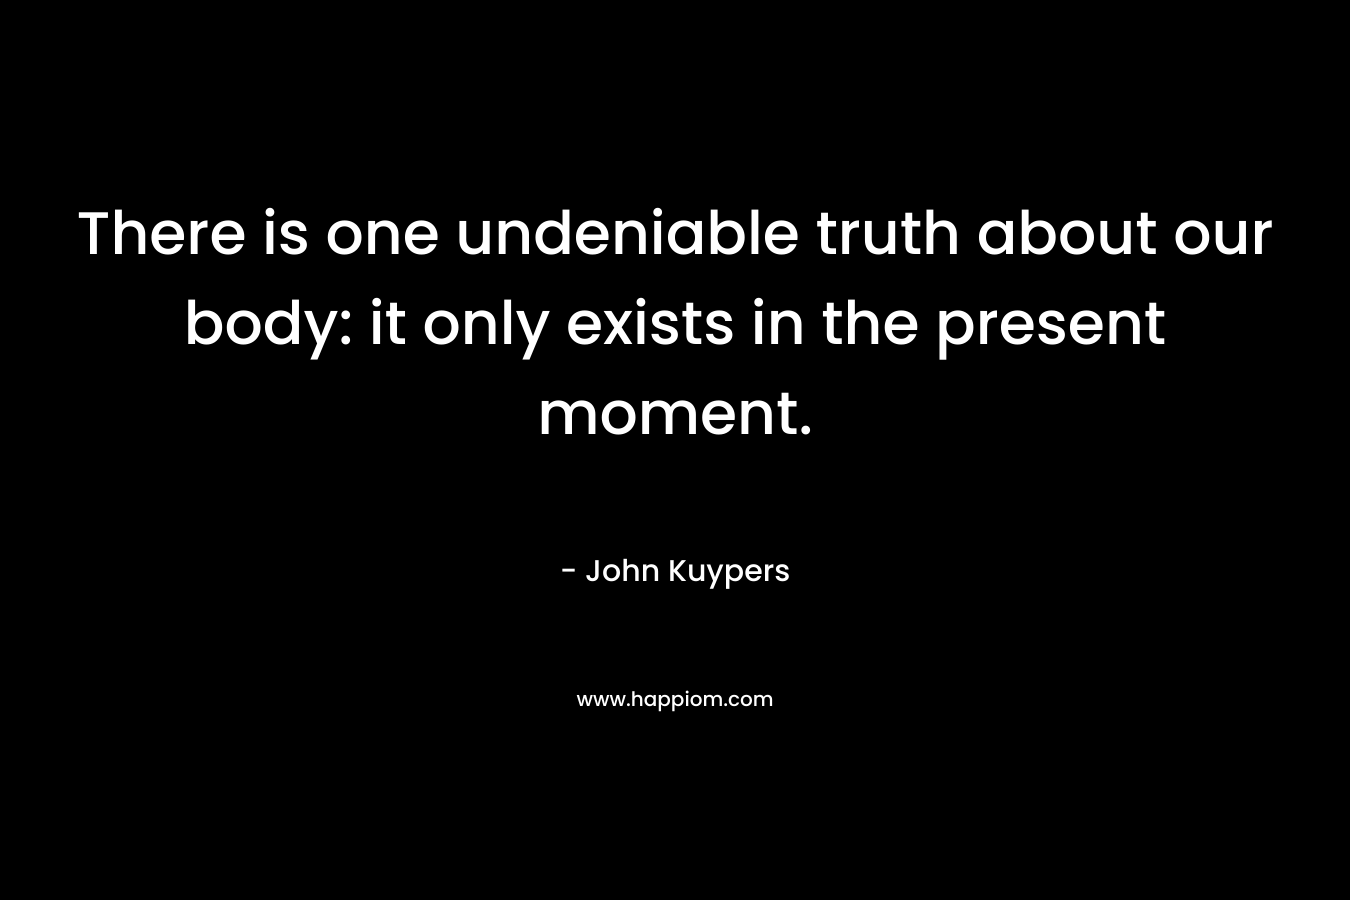 There is one undeniable truth about our body: it only exists in the present moment. – John Kuypers